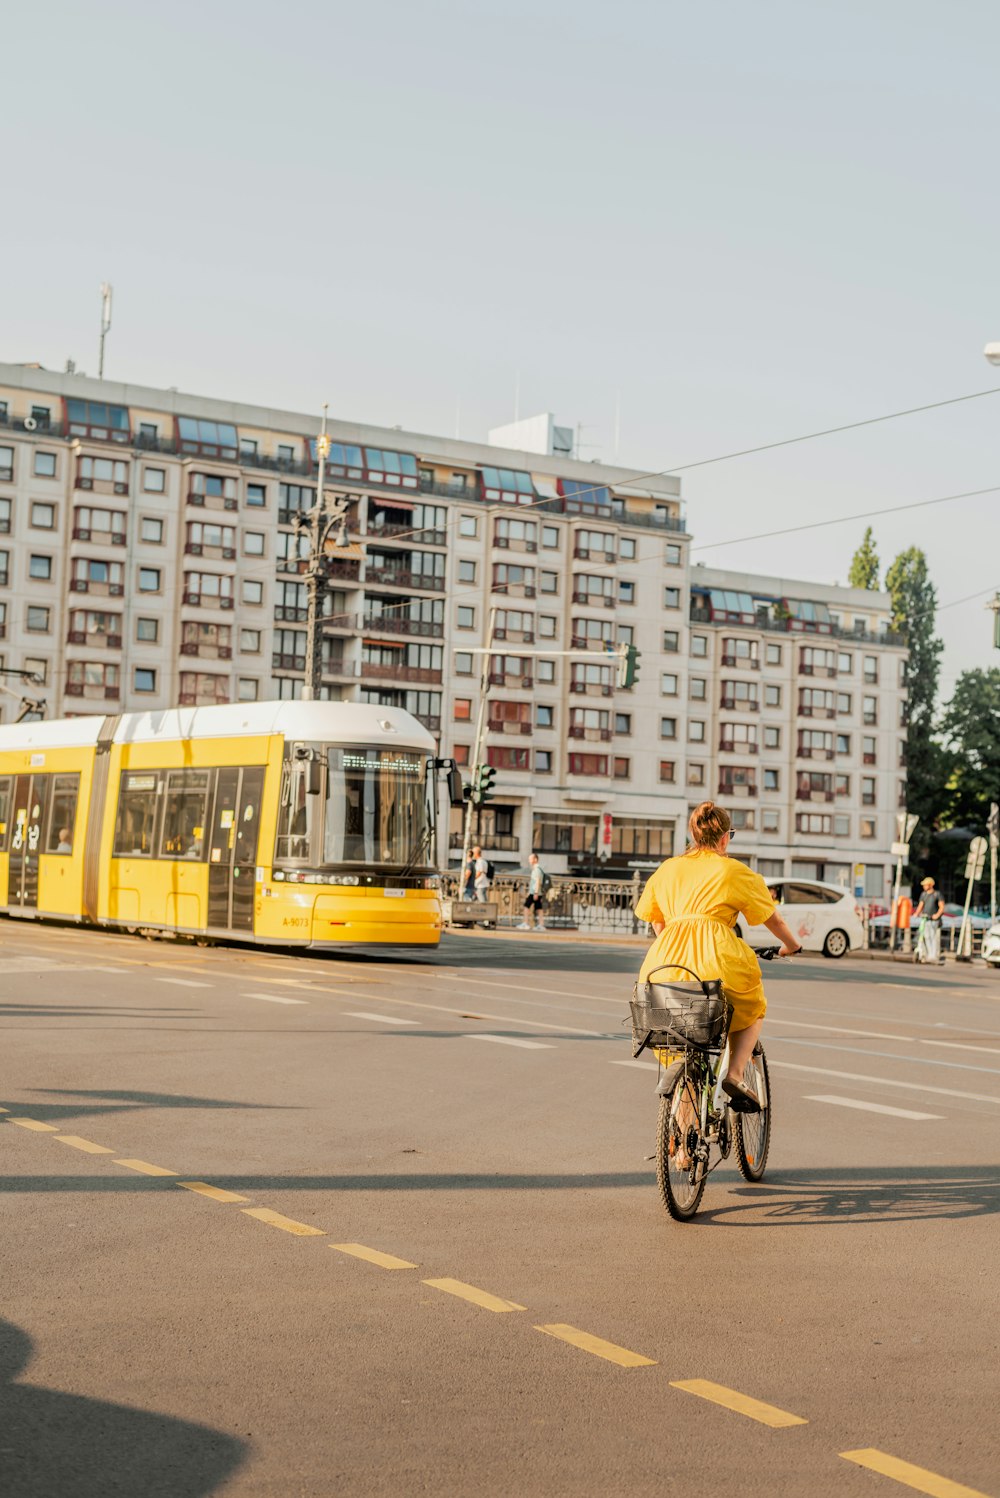 a person riding a bicycle next to a yellow bus